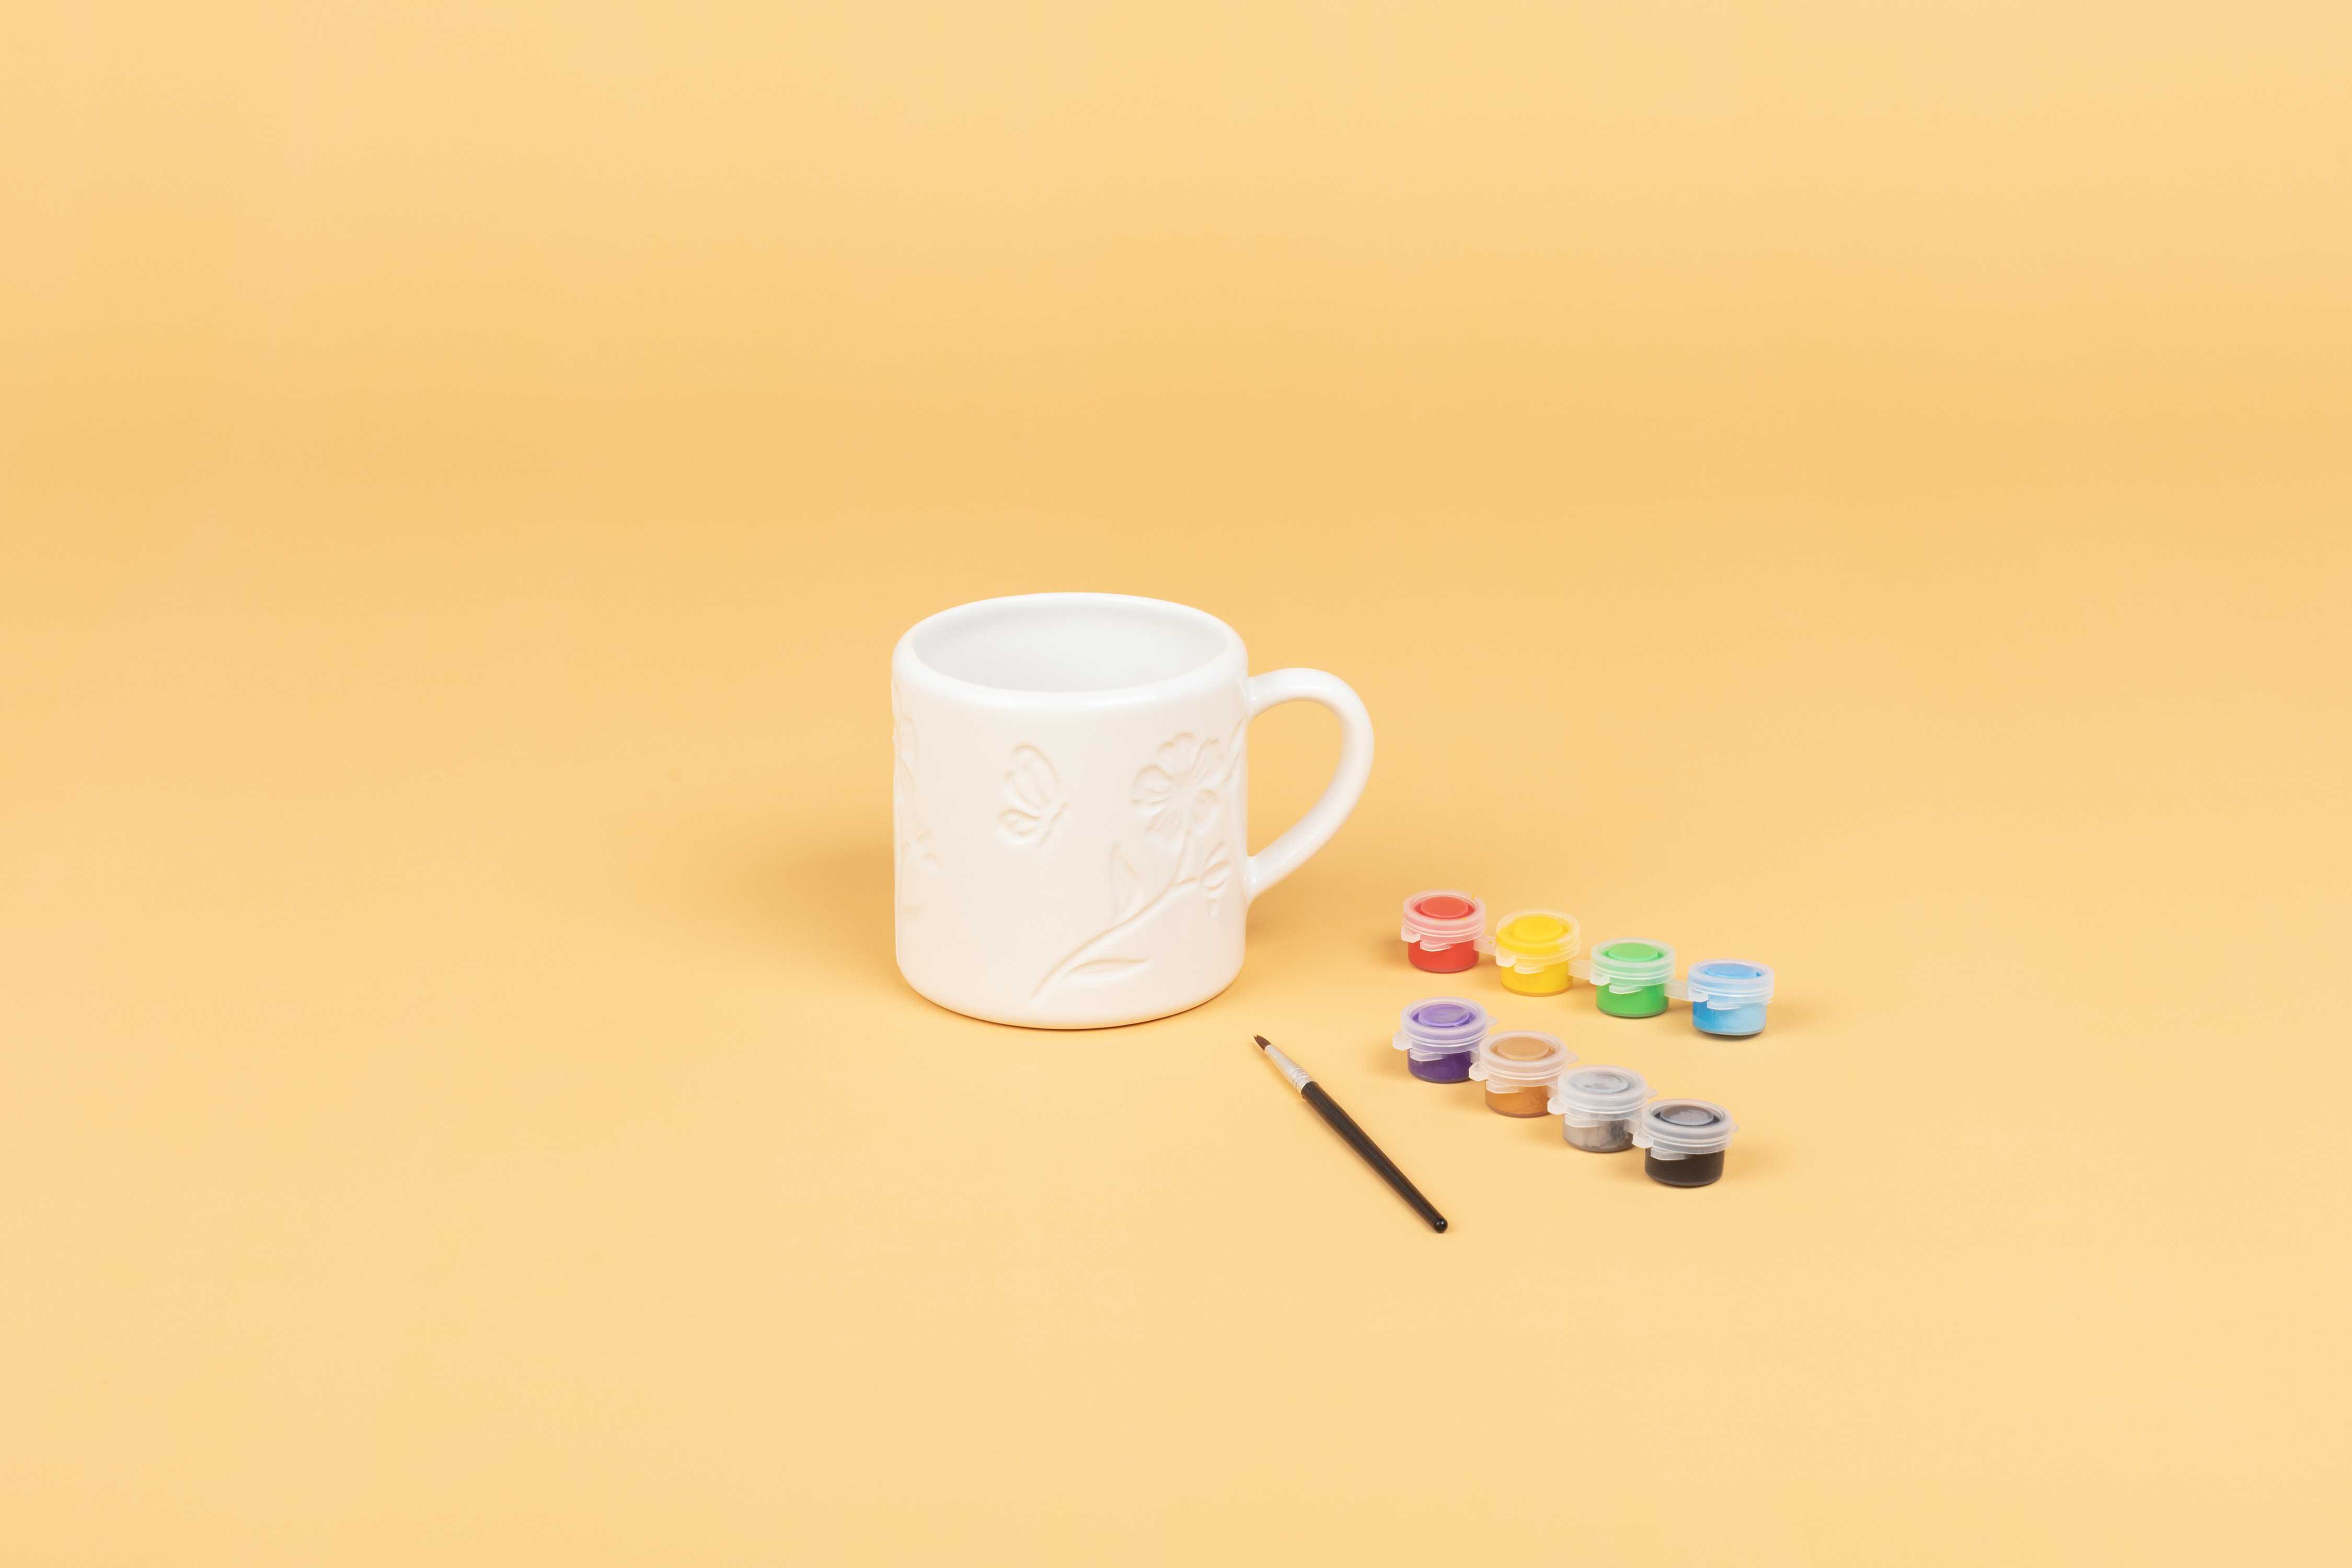 Prepare your mugs for painting